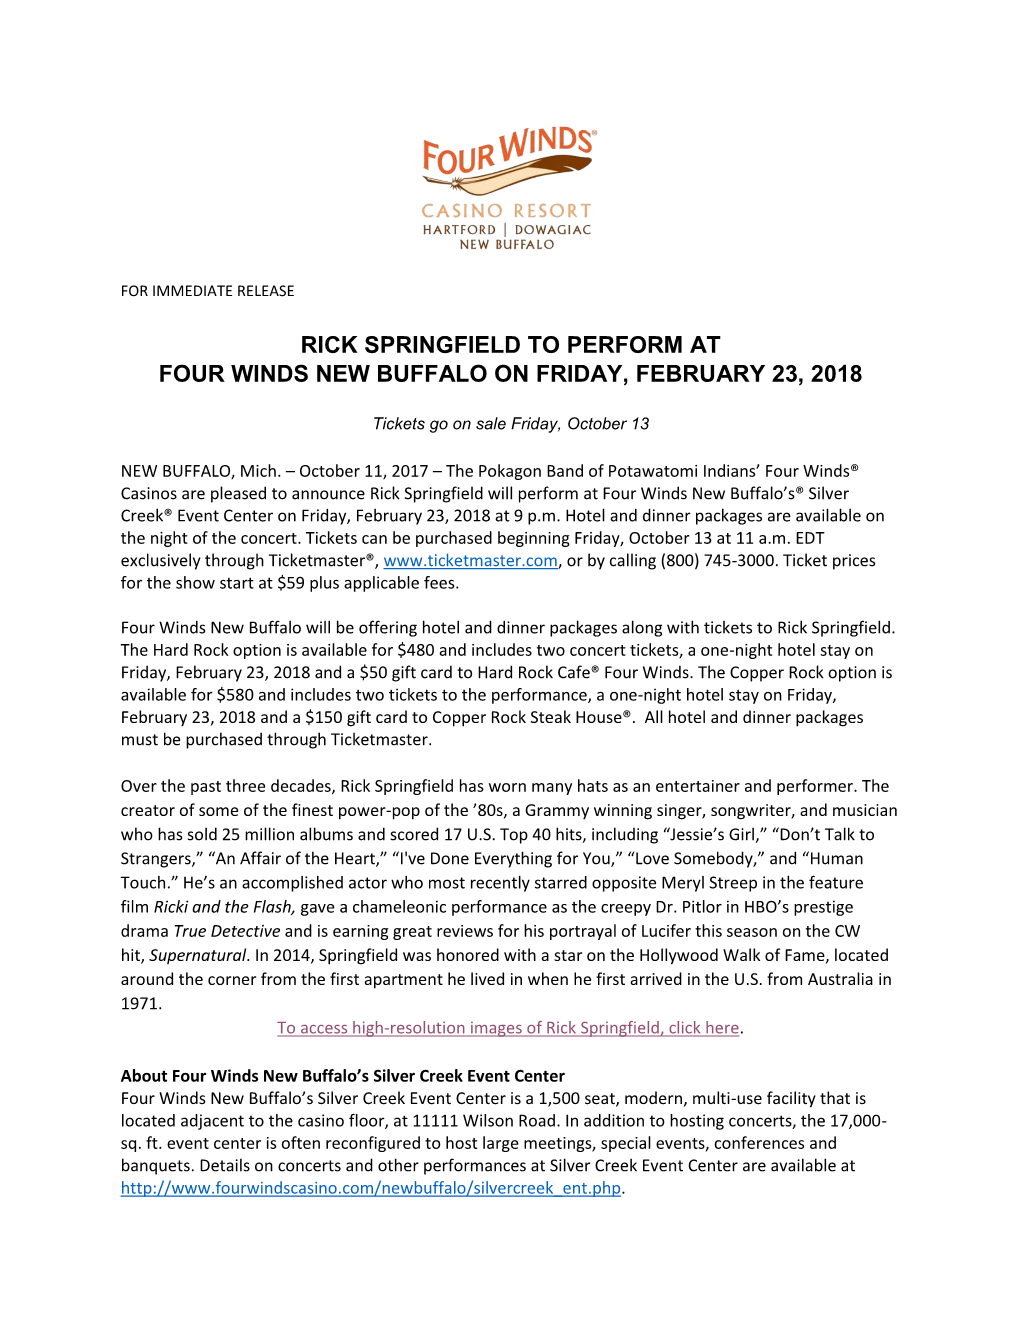 Rick Springfield to Perform at Four Winds New Buffalo on Friday, February 23, 2018